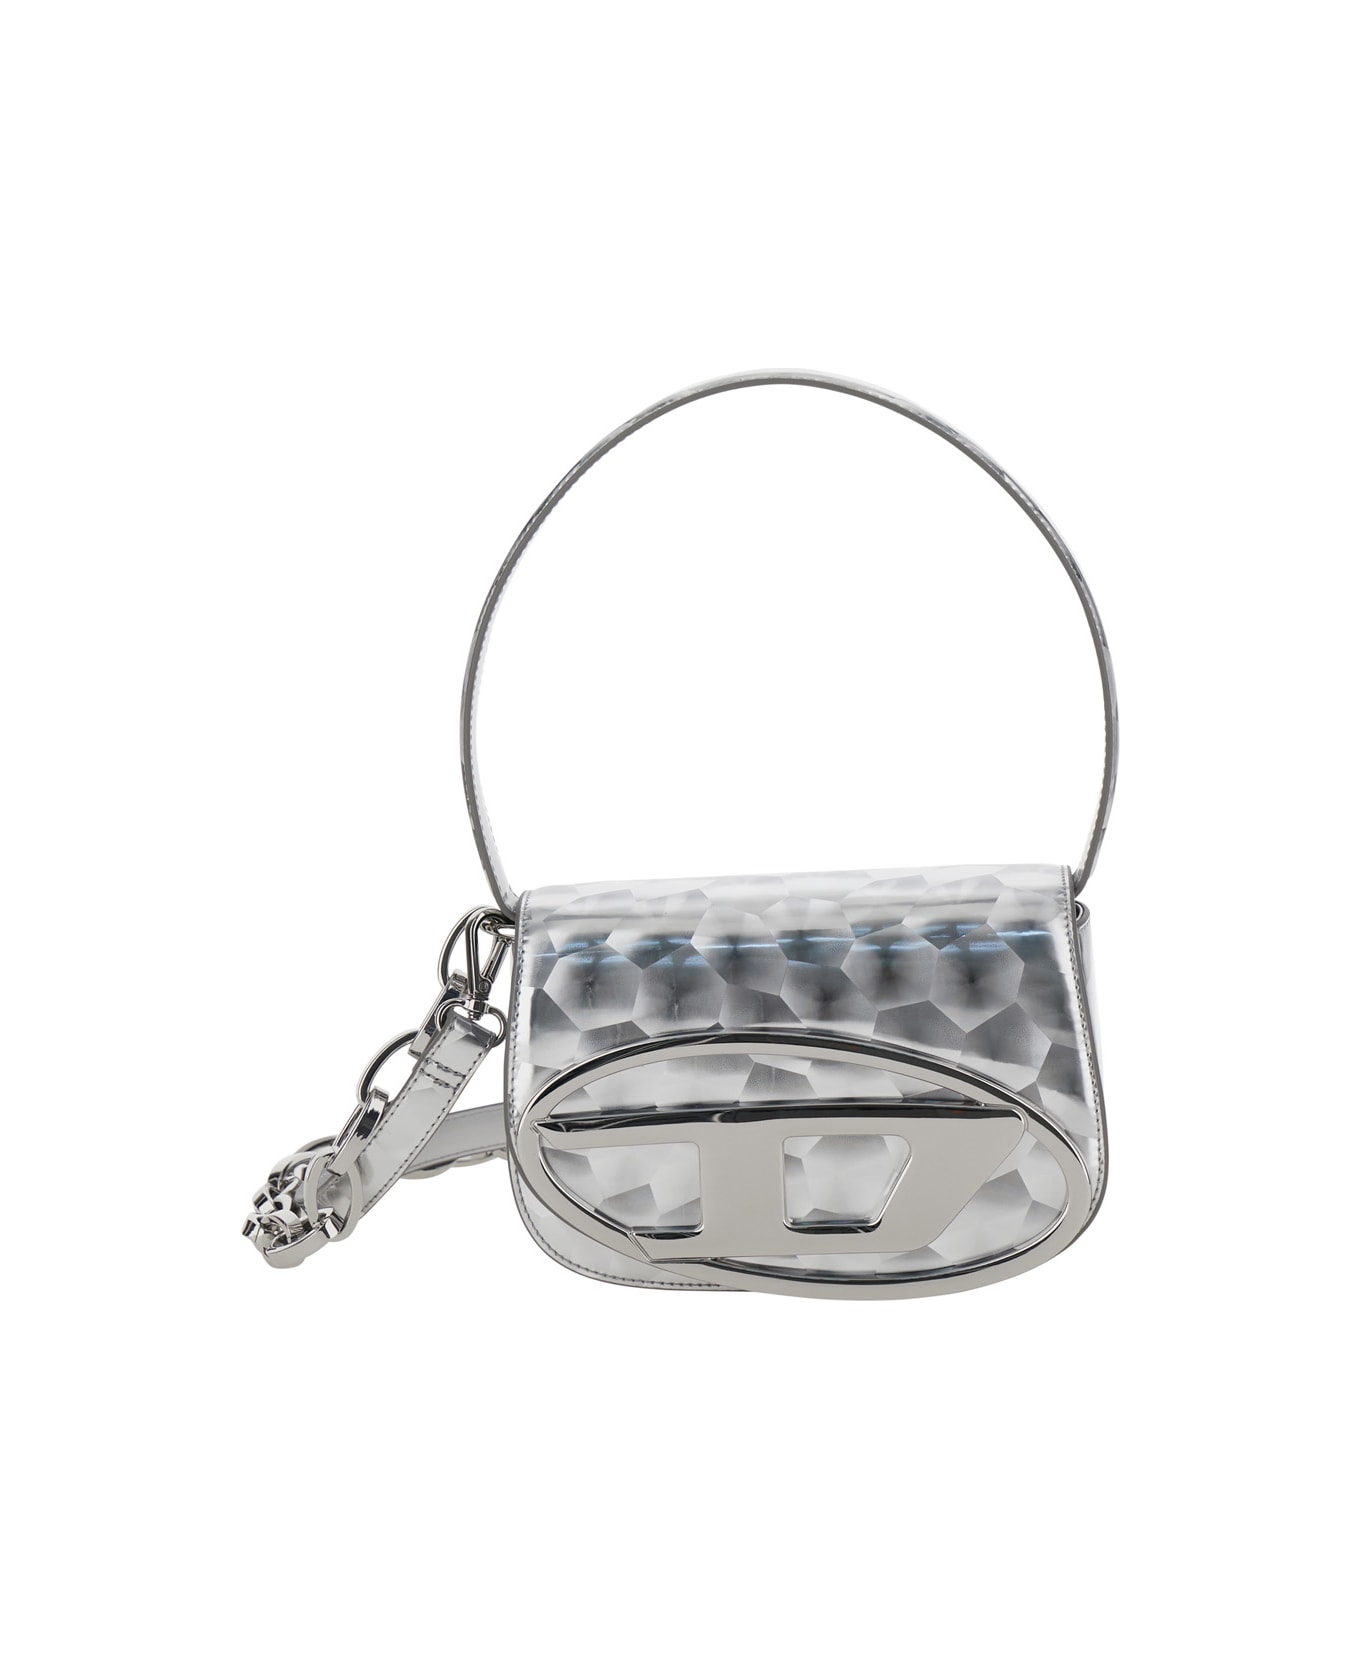 Diesel '1dr' Silver Shoulder Bag With Front Metallic Oval D Logo In Techno Fabric Woman - Metallic ショルダーバッグ